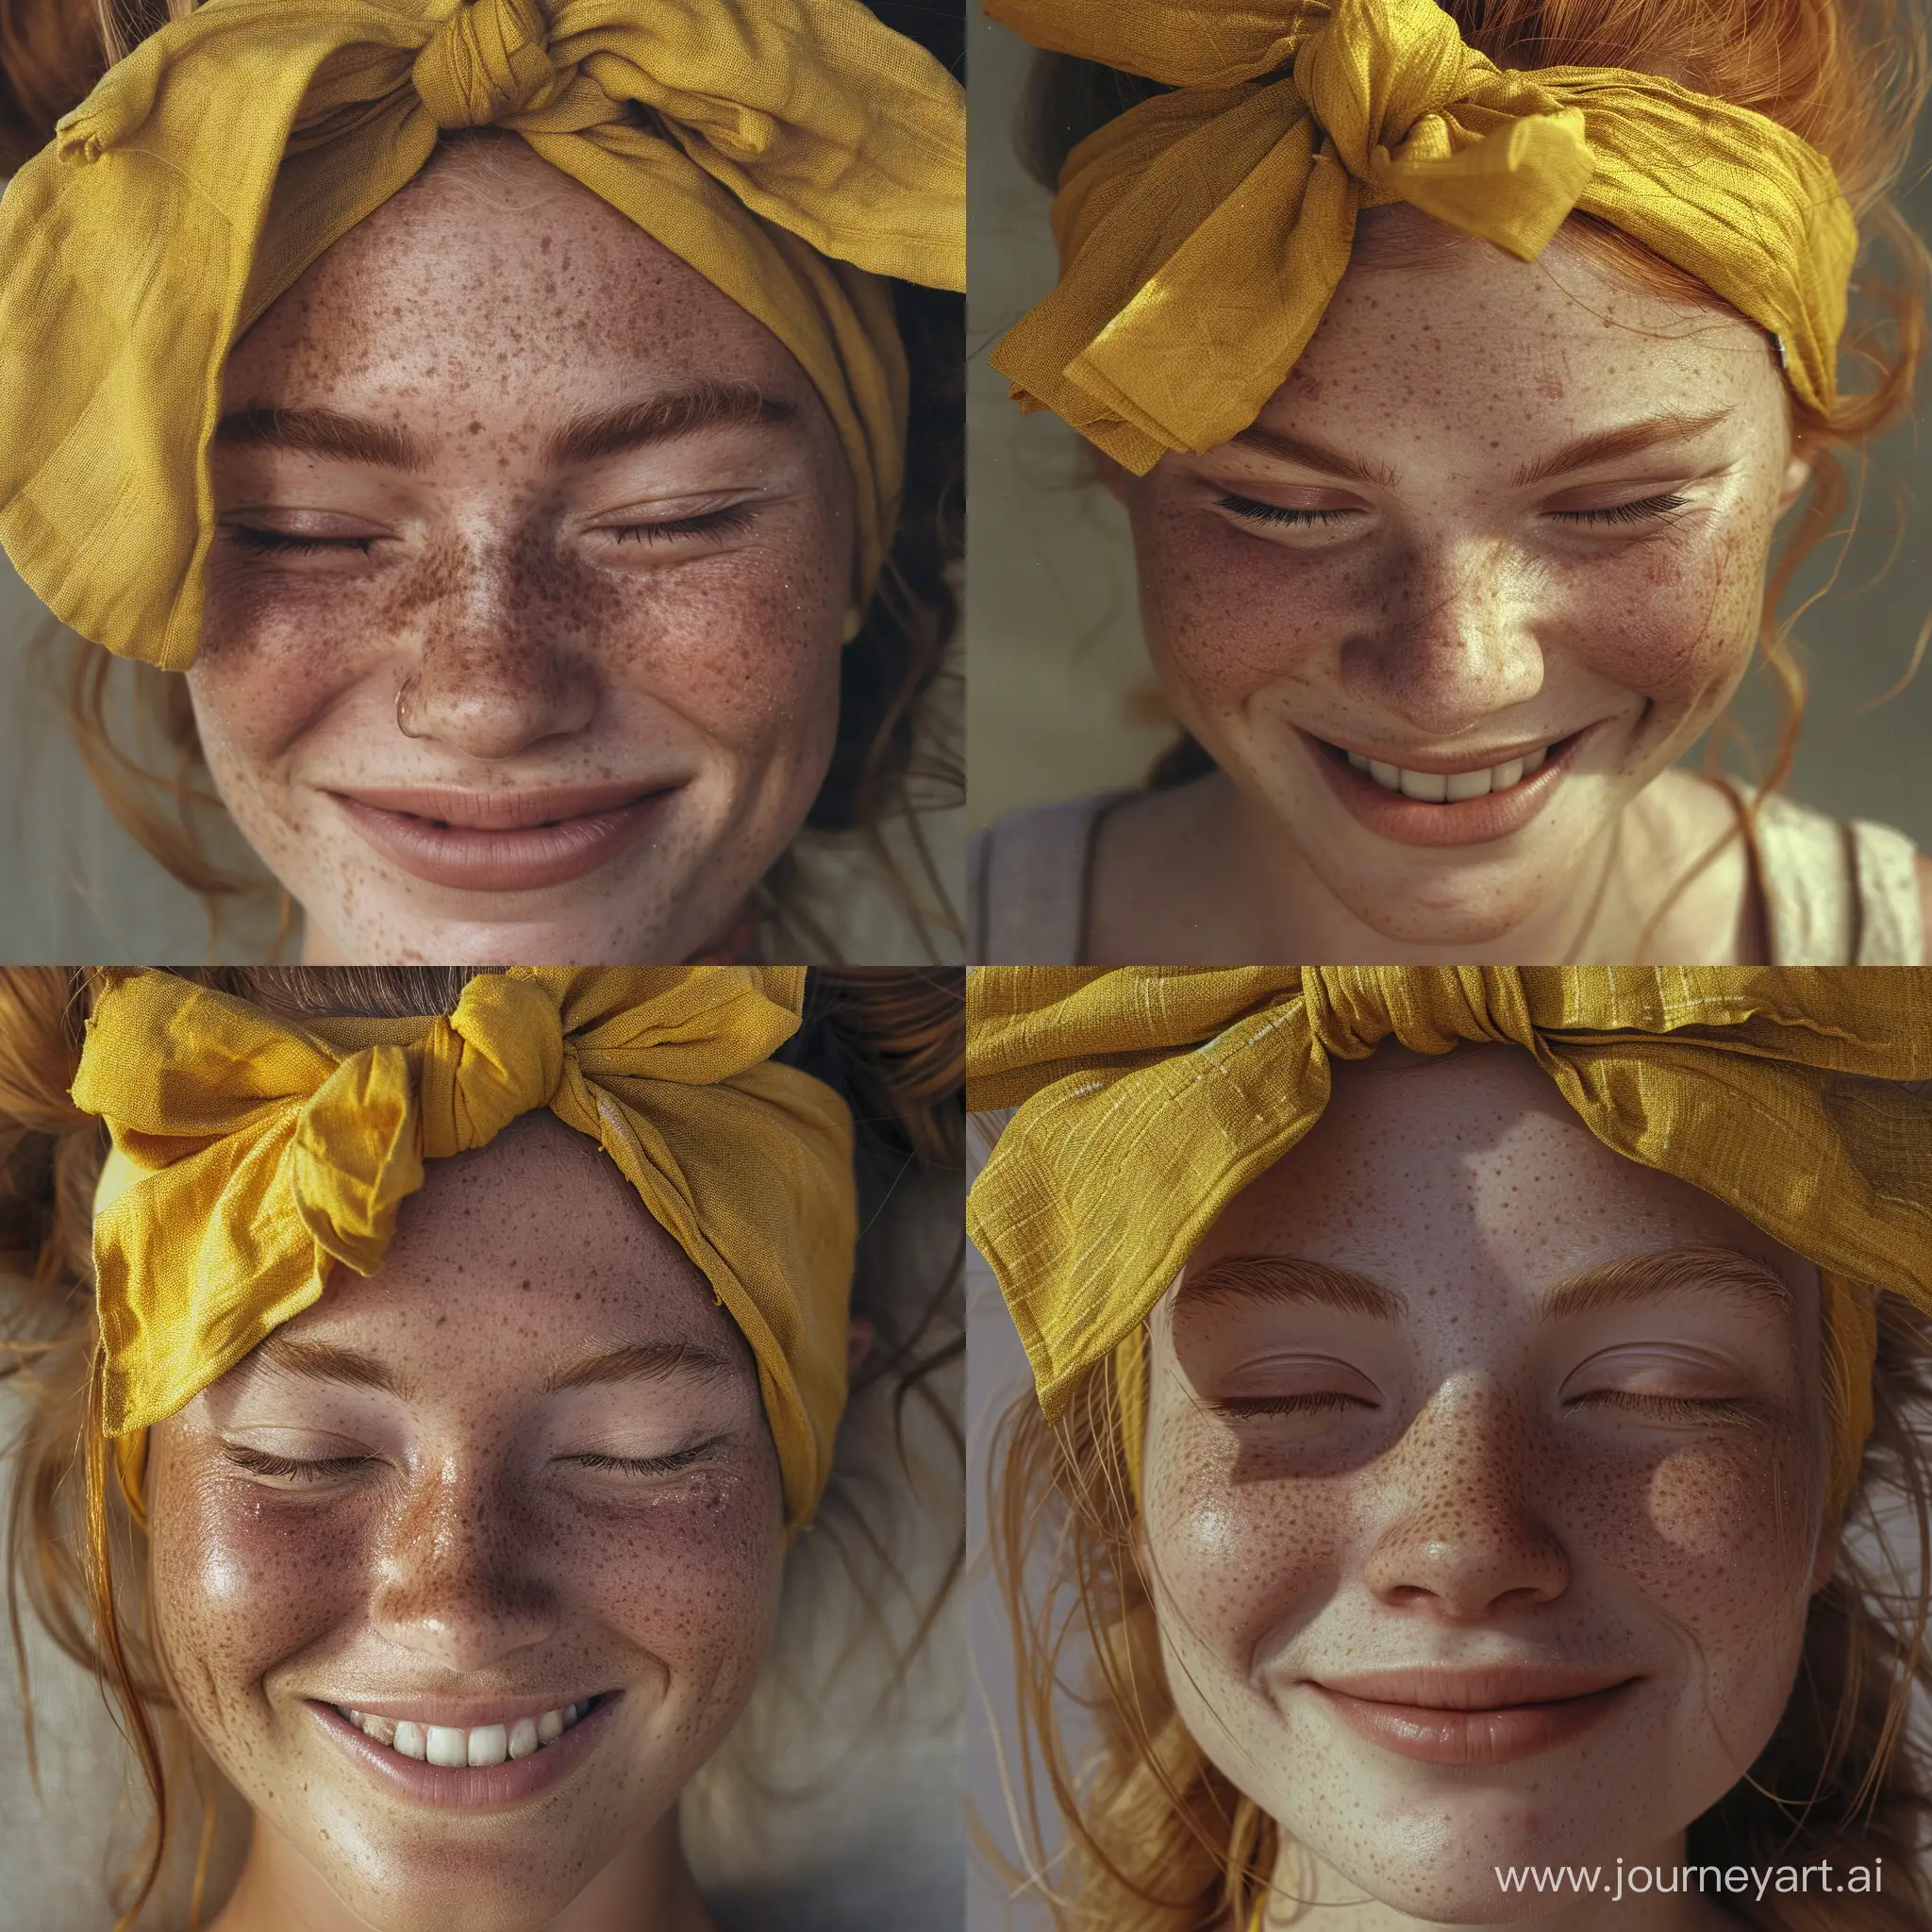 Joyful-Young-Woman-with-Freckles-and-Yellow-Bow-Headband